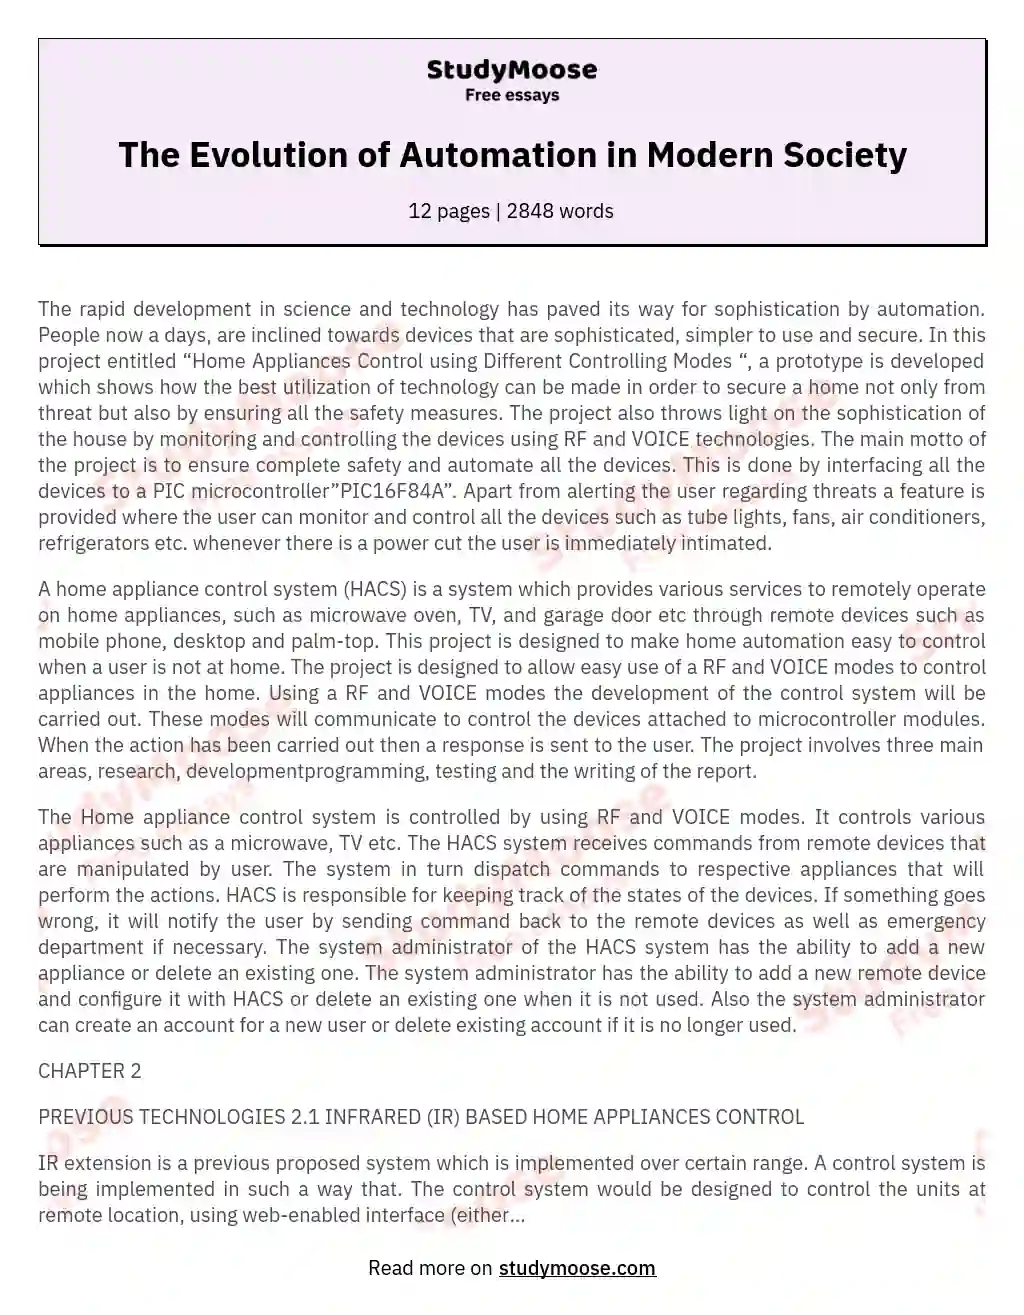 The Evolution of Automation in Modern Society essay